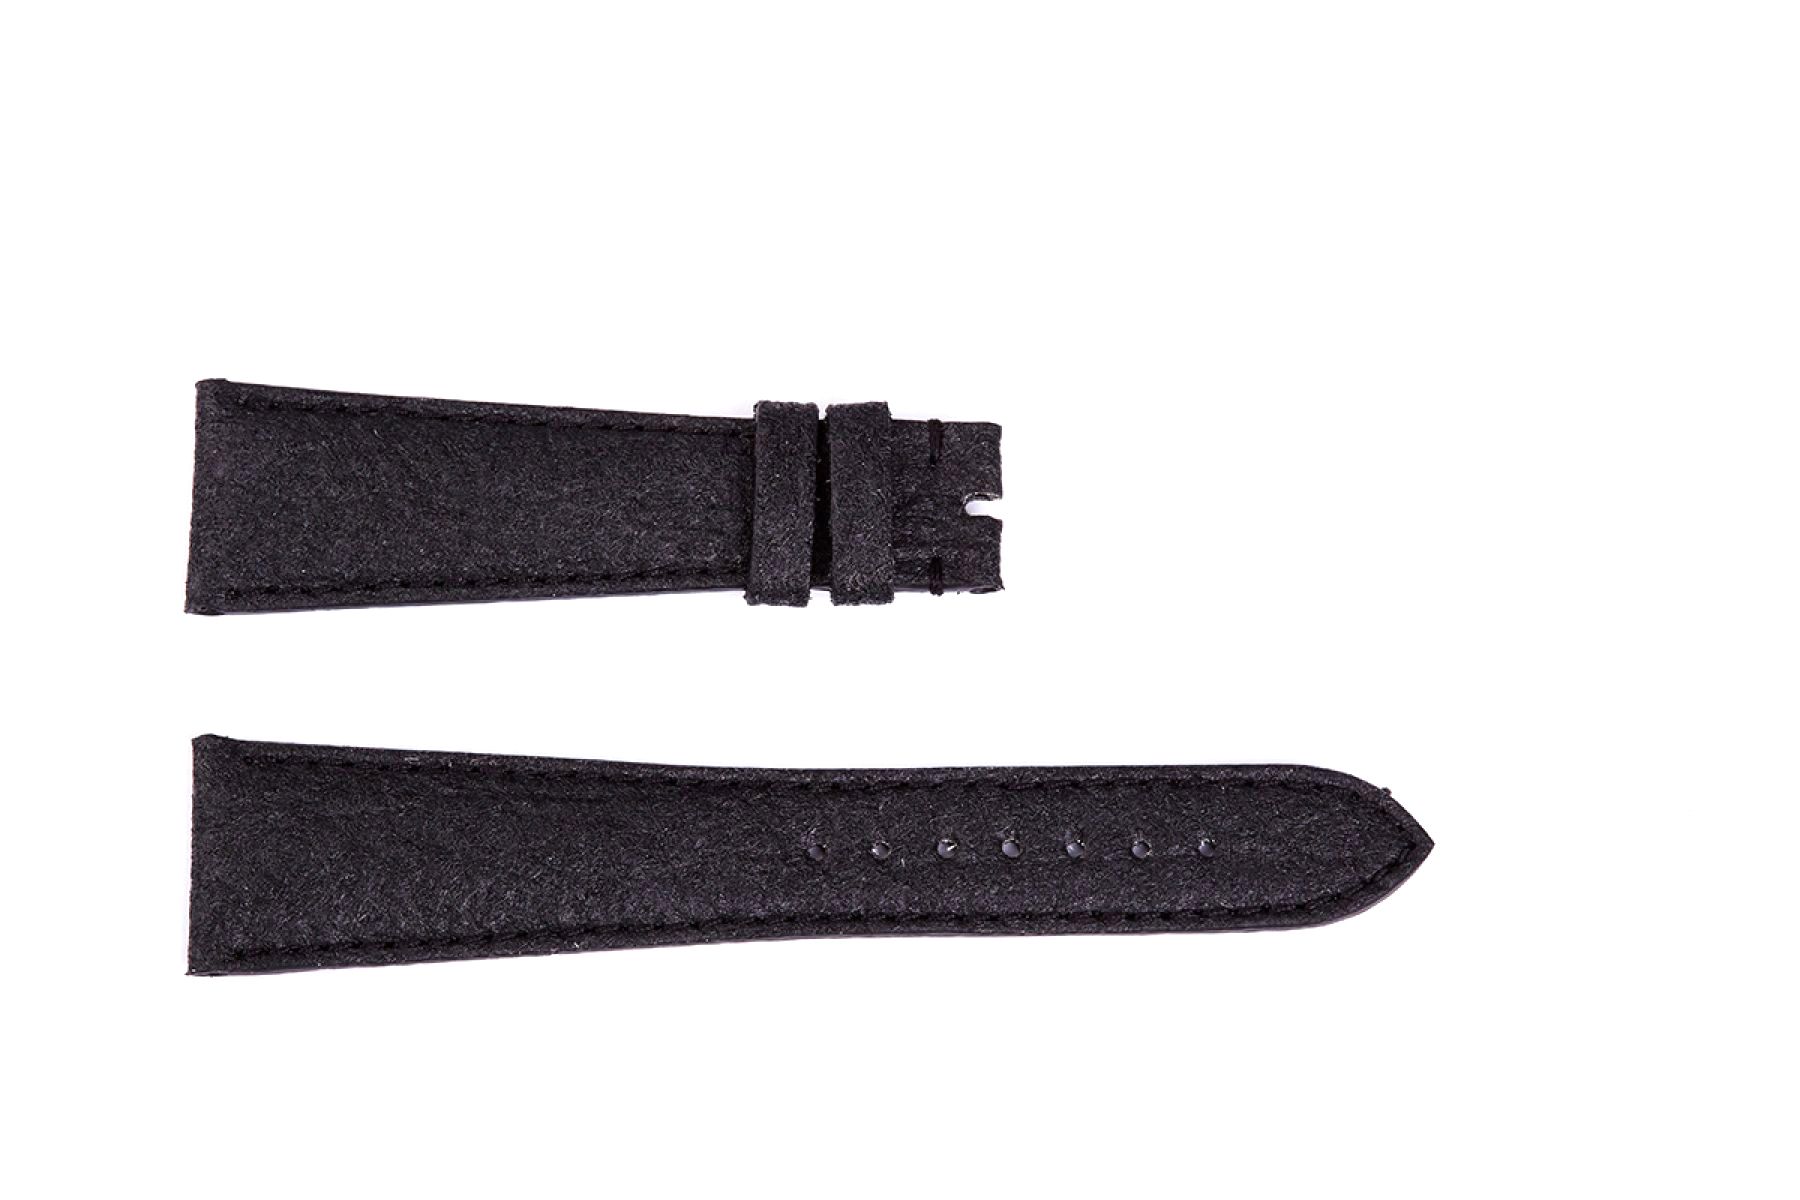 Onyx Black Matte Strap from bio-based Pinatex leather for General style timepieces